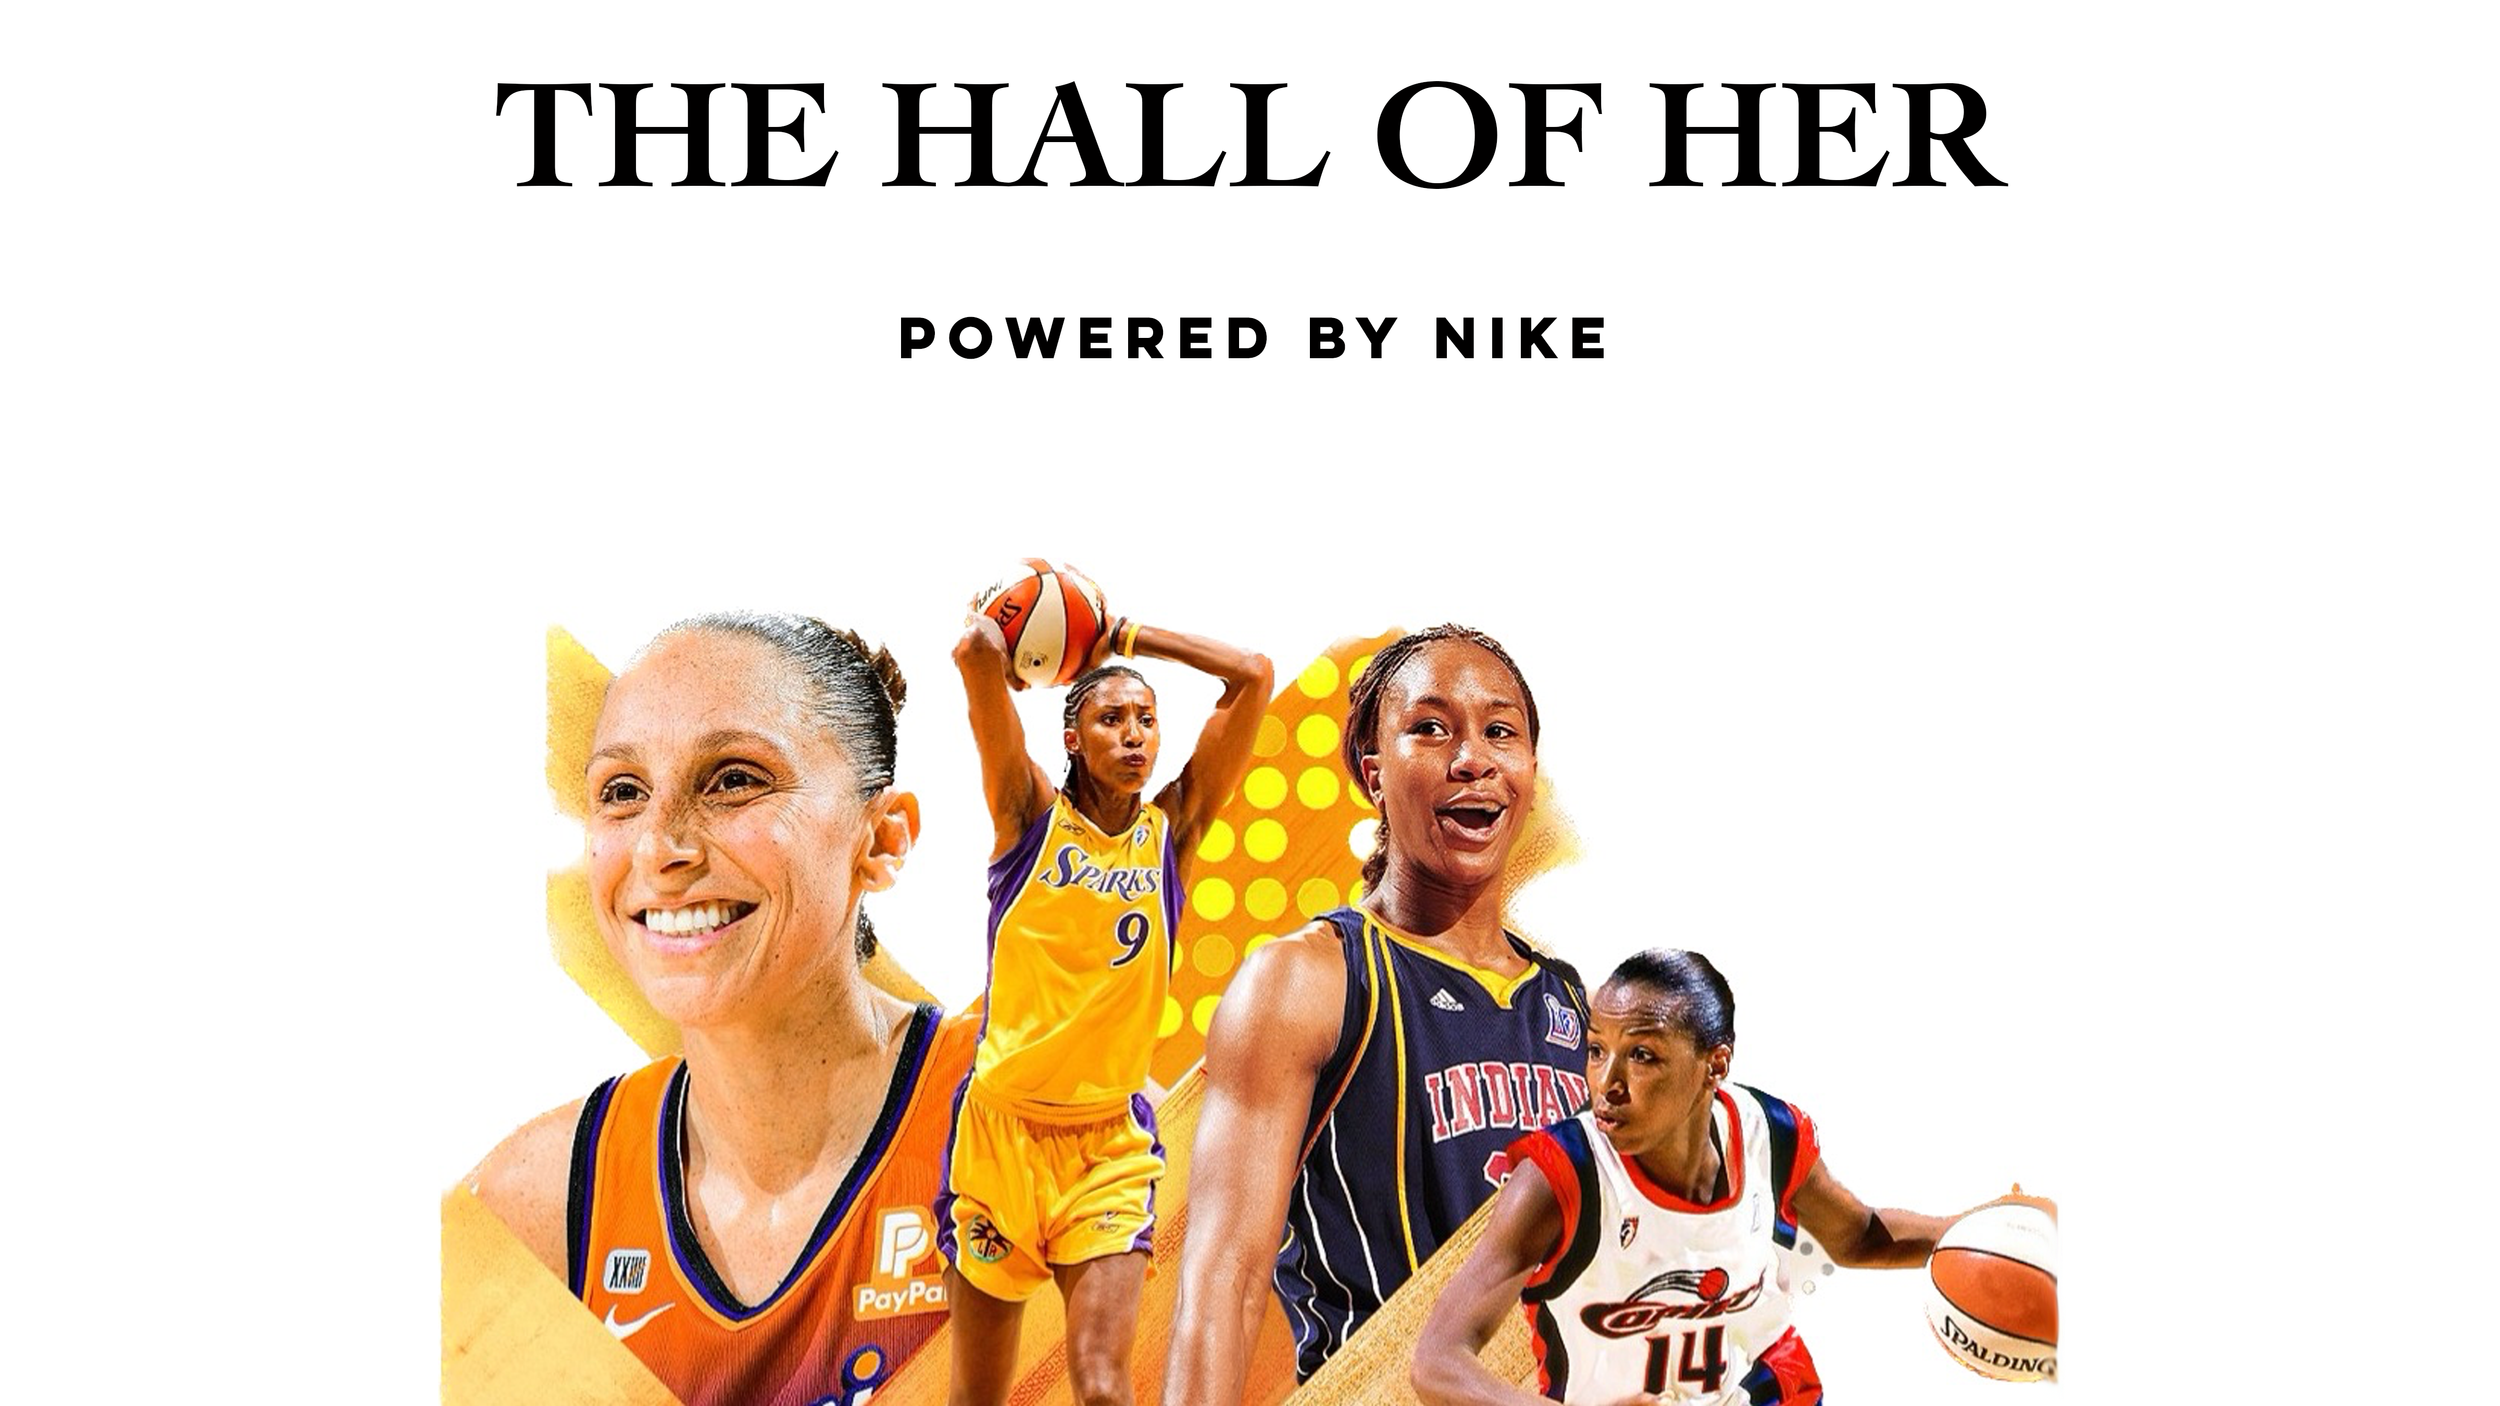  An immersive experience celebrating the W25. (WNBA’s top 25 players of all time) Participants will experience highlights from the greatest moments in WNBA history during All-Star weekend. 